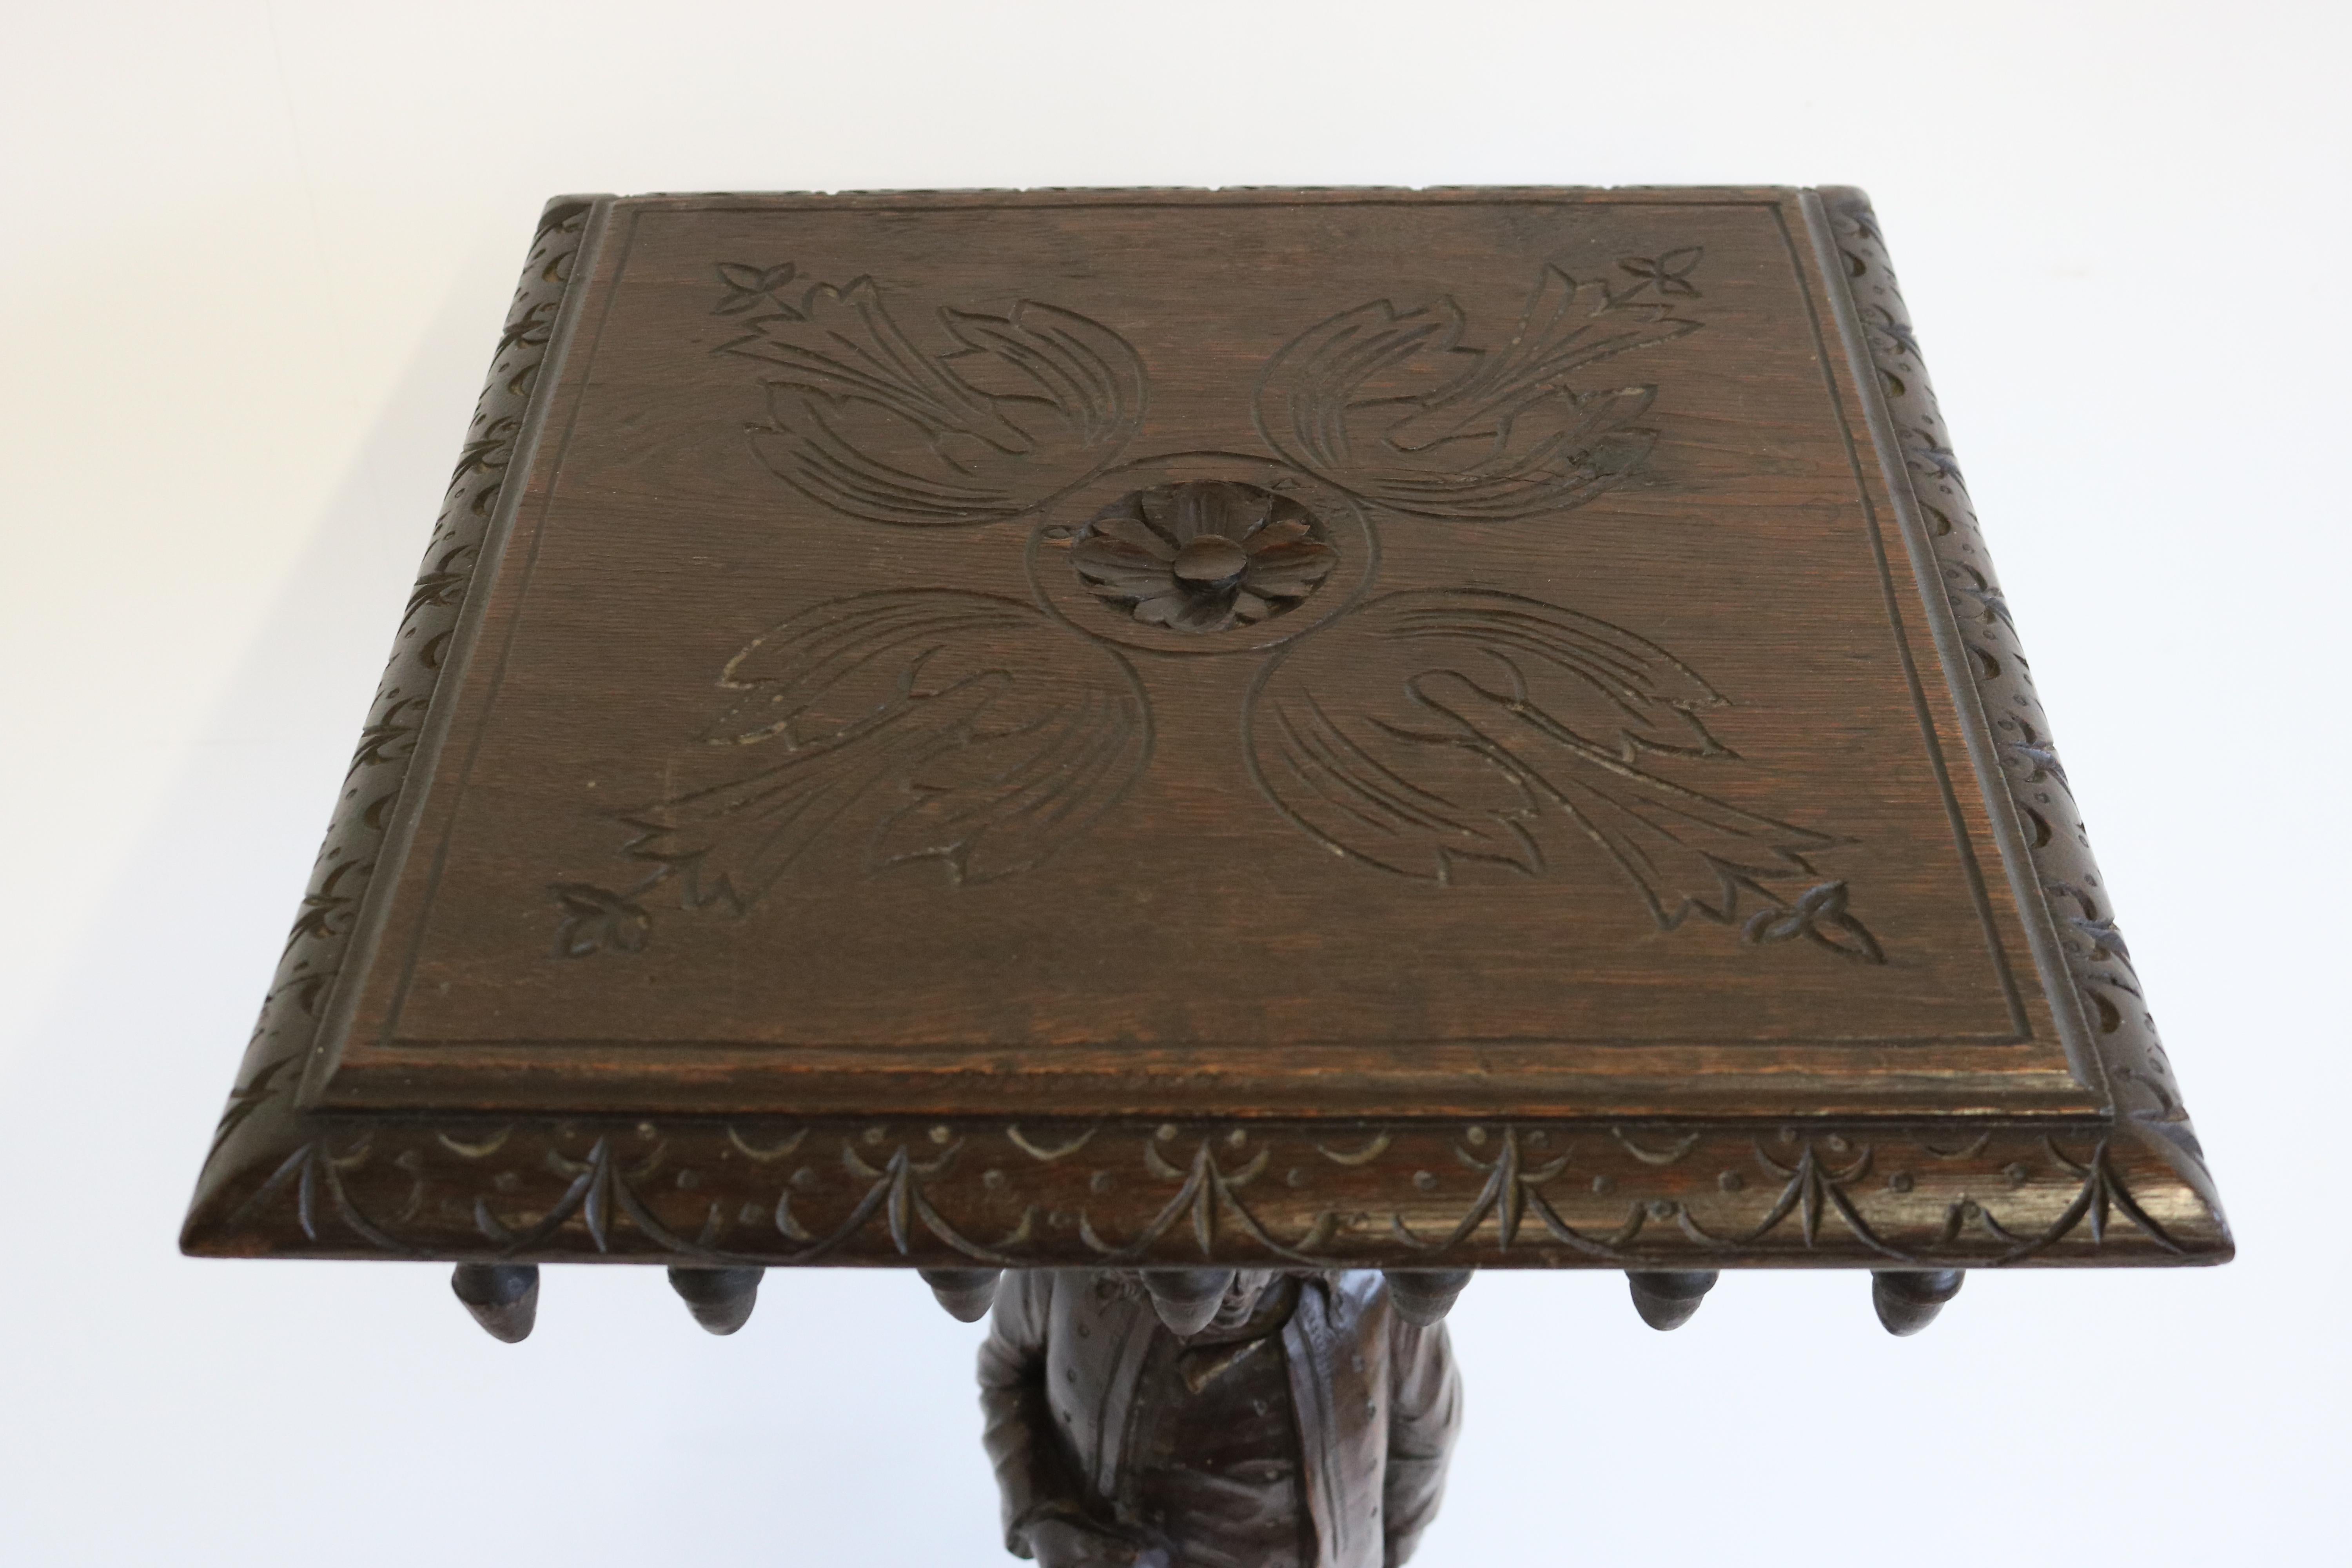 Antique French Breton Brittany Pedestal Table 19th Century Figural Carved Oak For Sale 3